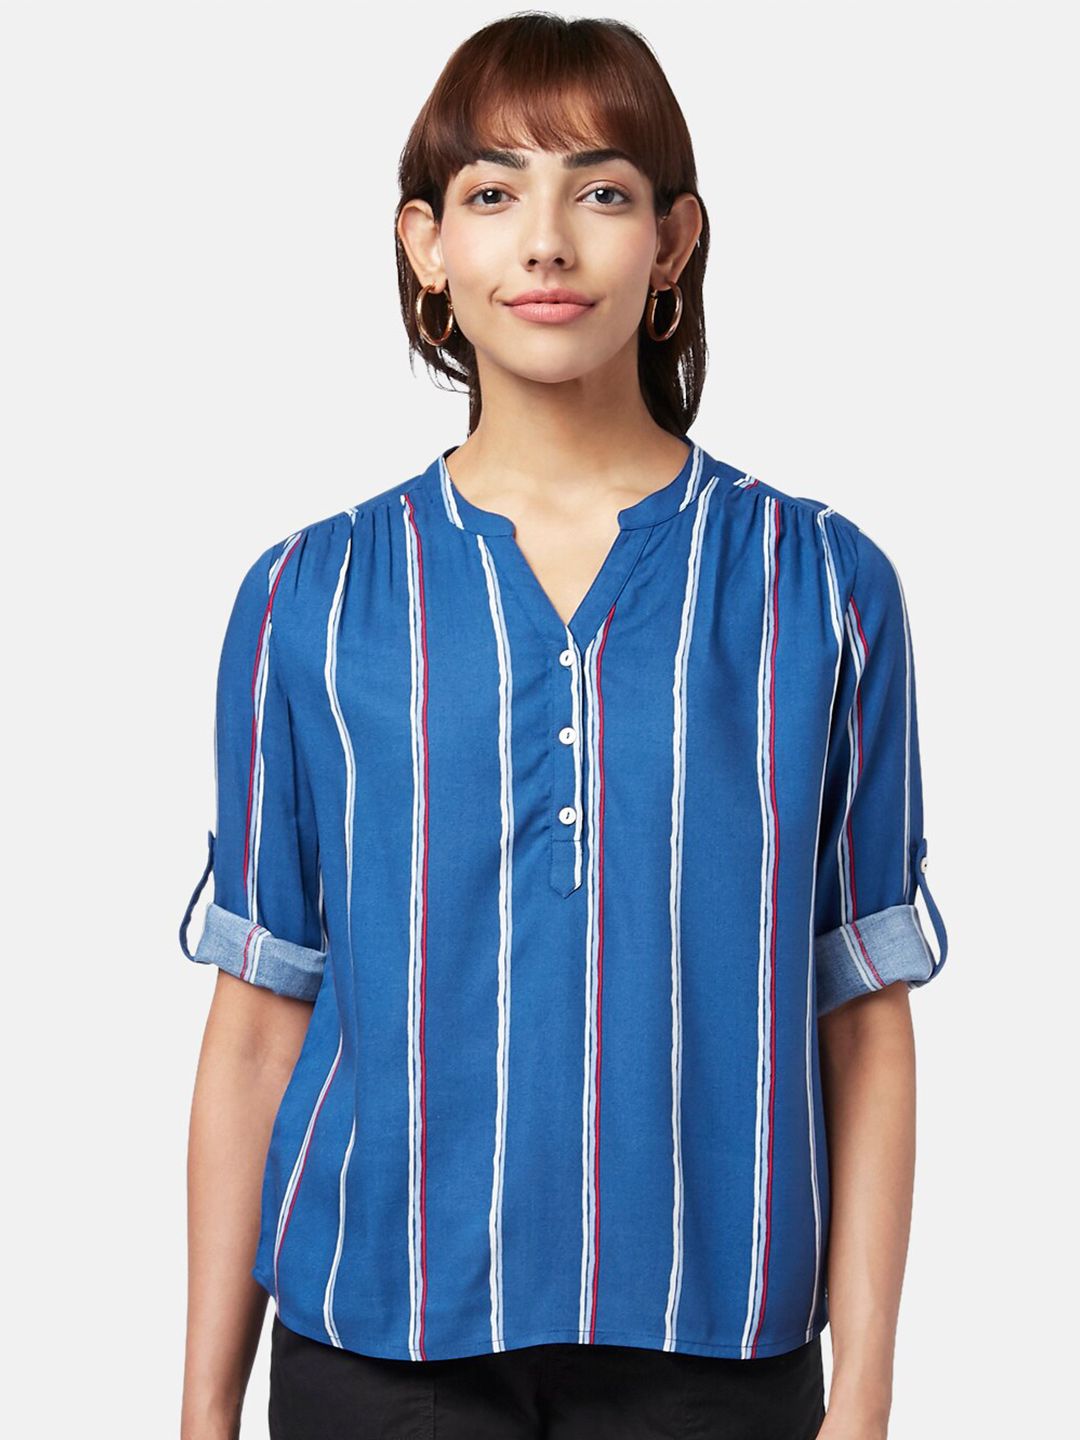 Honey by Pantaloons Blue Striped Mandarin Collar Roll-Up Sleeves Shirt Style Top Price in India